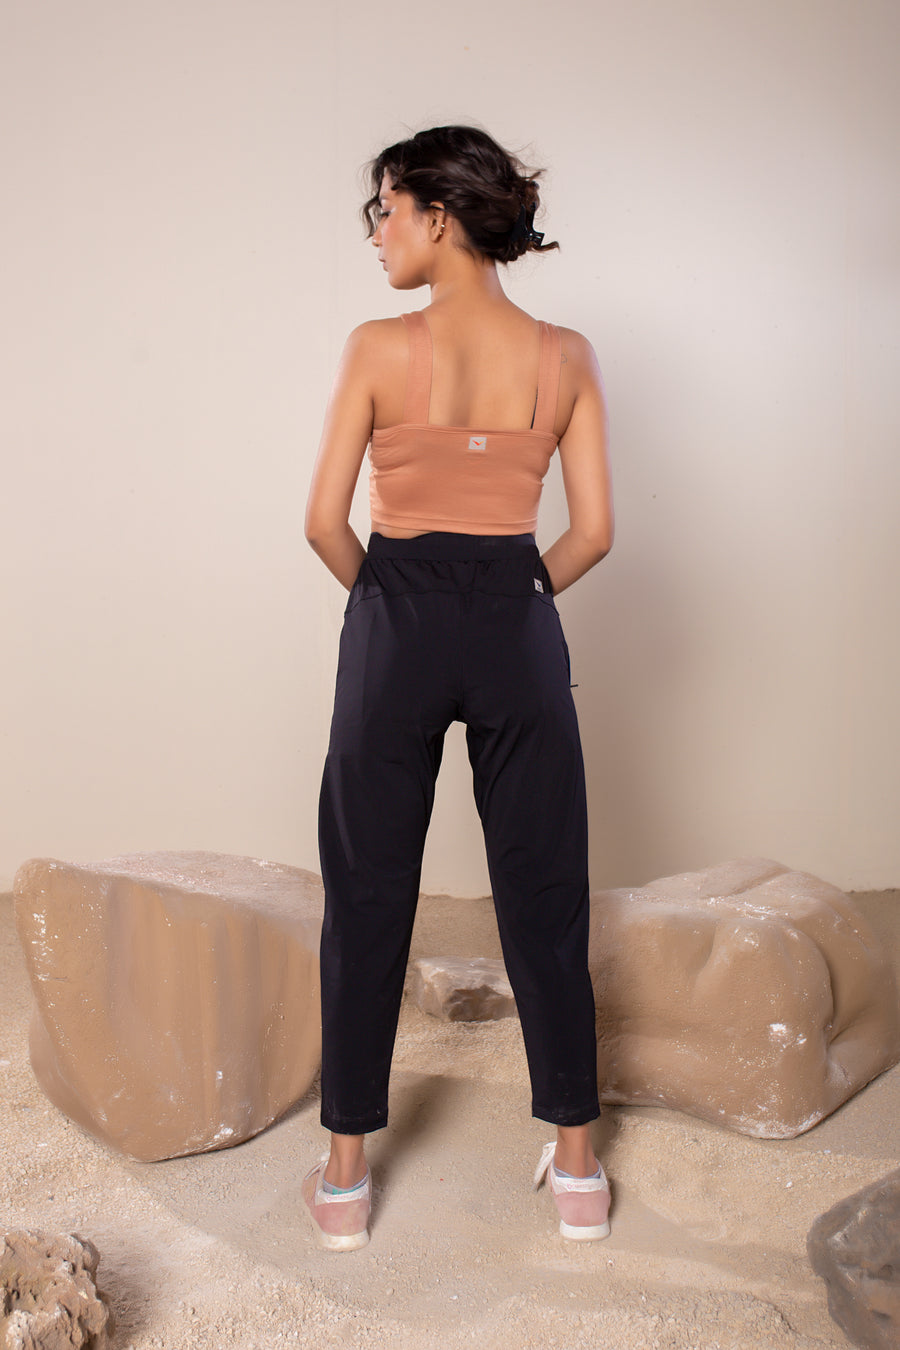 Women's Wanderlust Pant Black | VOLO Apparel | These pants are designed to give you wanderlust, an ultralight super durable athletic pant with a five pocket design, a 3 point gusset for all your movements and a high ankle tapered bottom. The revolutional Italian nylon is patented with UPF 50 protection and extreme breathability. The one pant to go everywhere and do everything!